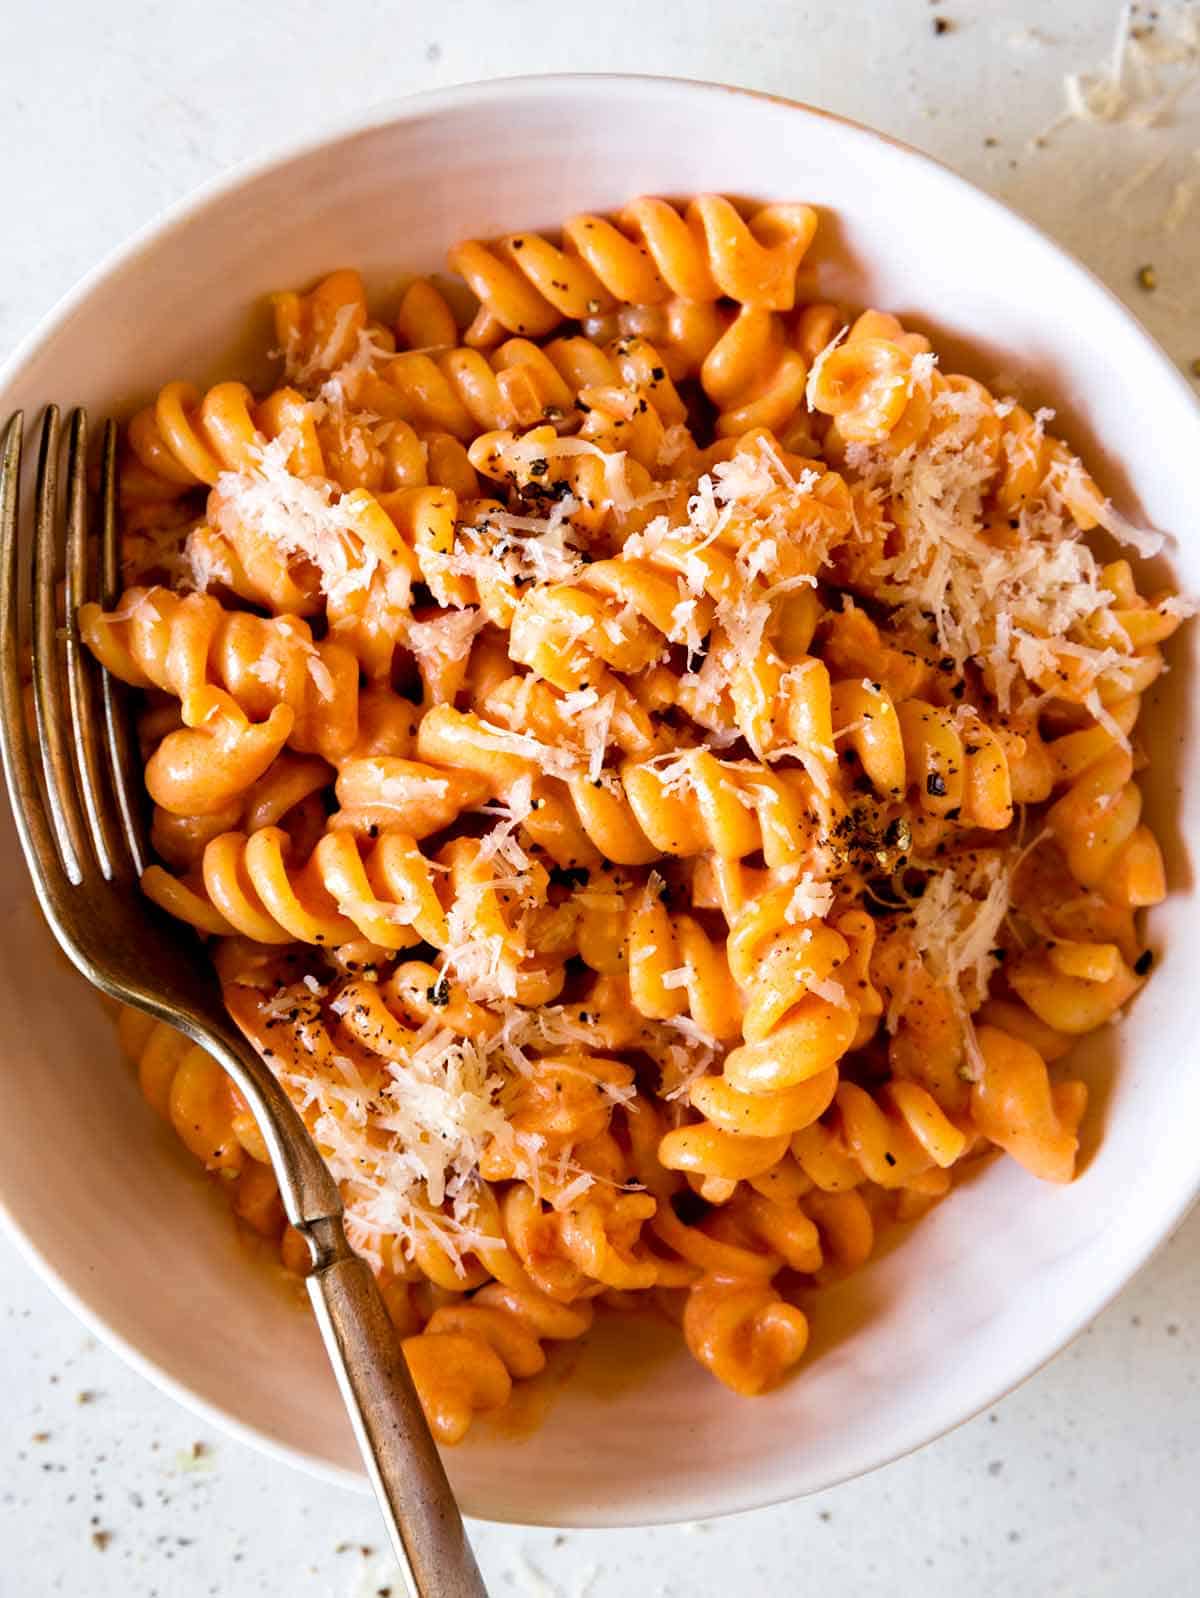 A close up of a bowl of fusilli pasta with vodka sauce and a fork.